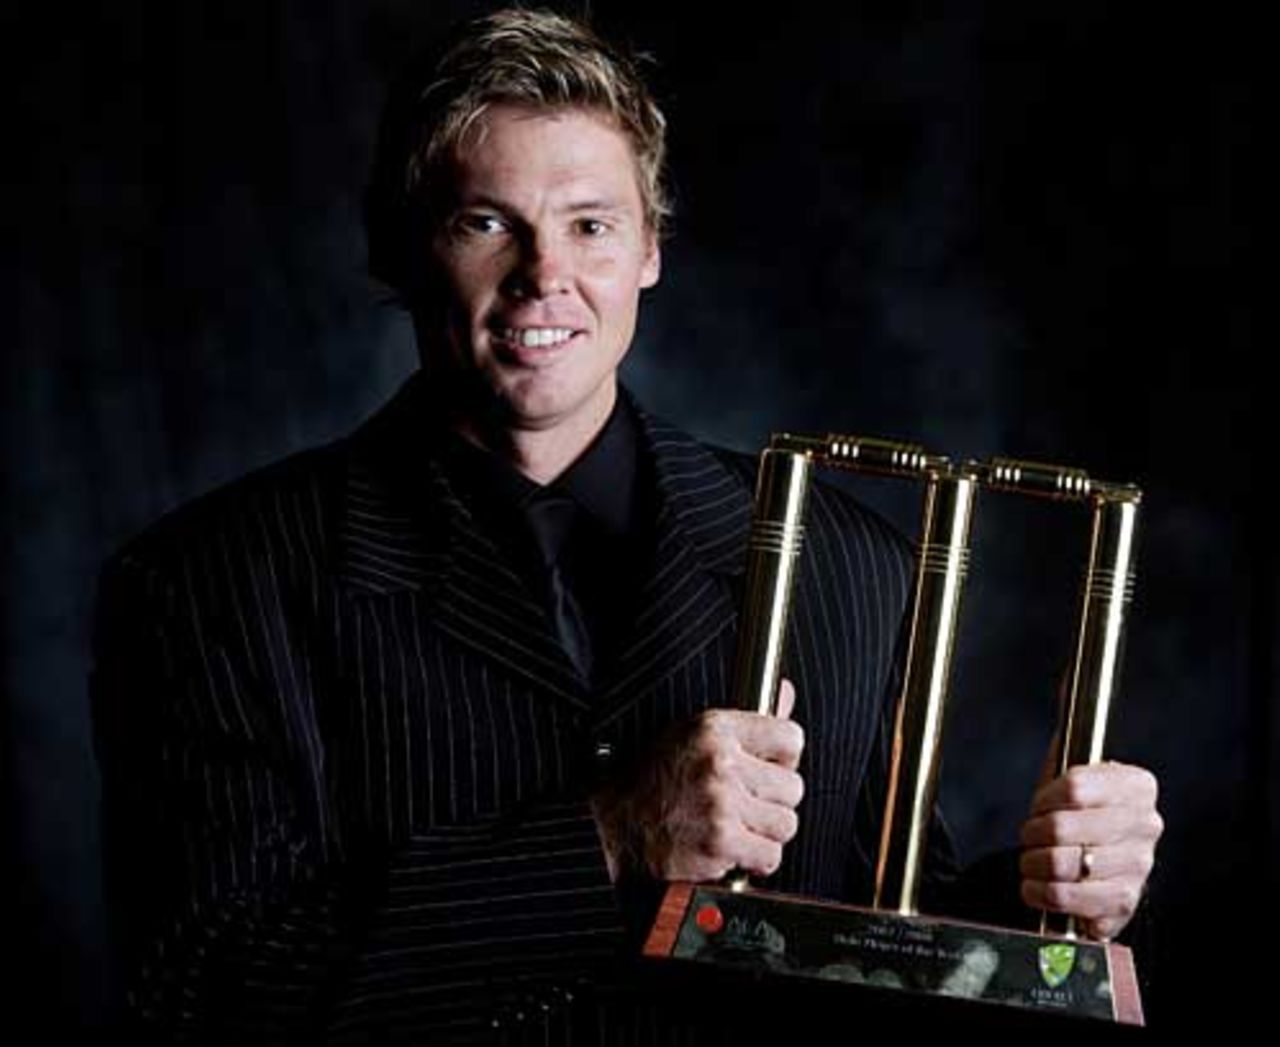 Ashley Noffke walked away with State Player of the Year, Allan Border Medal, Melbourne, February 26, 2008